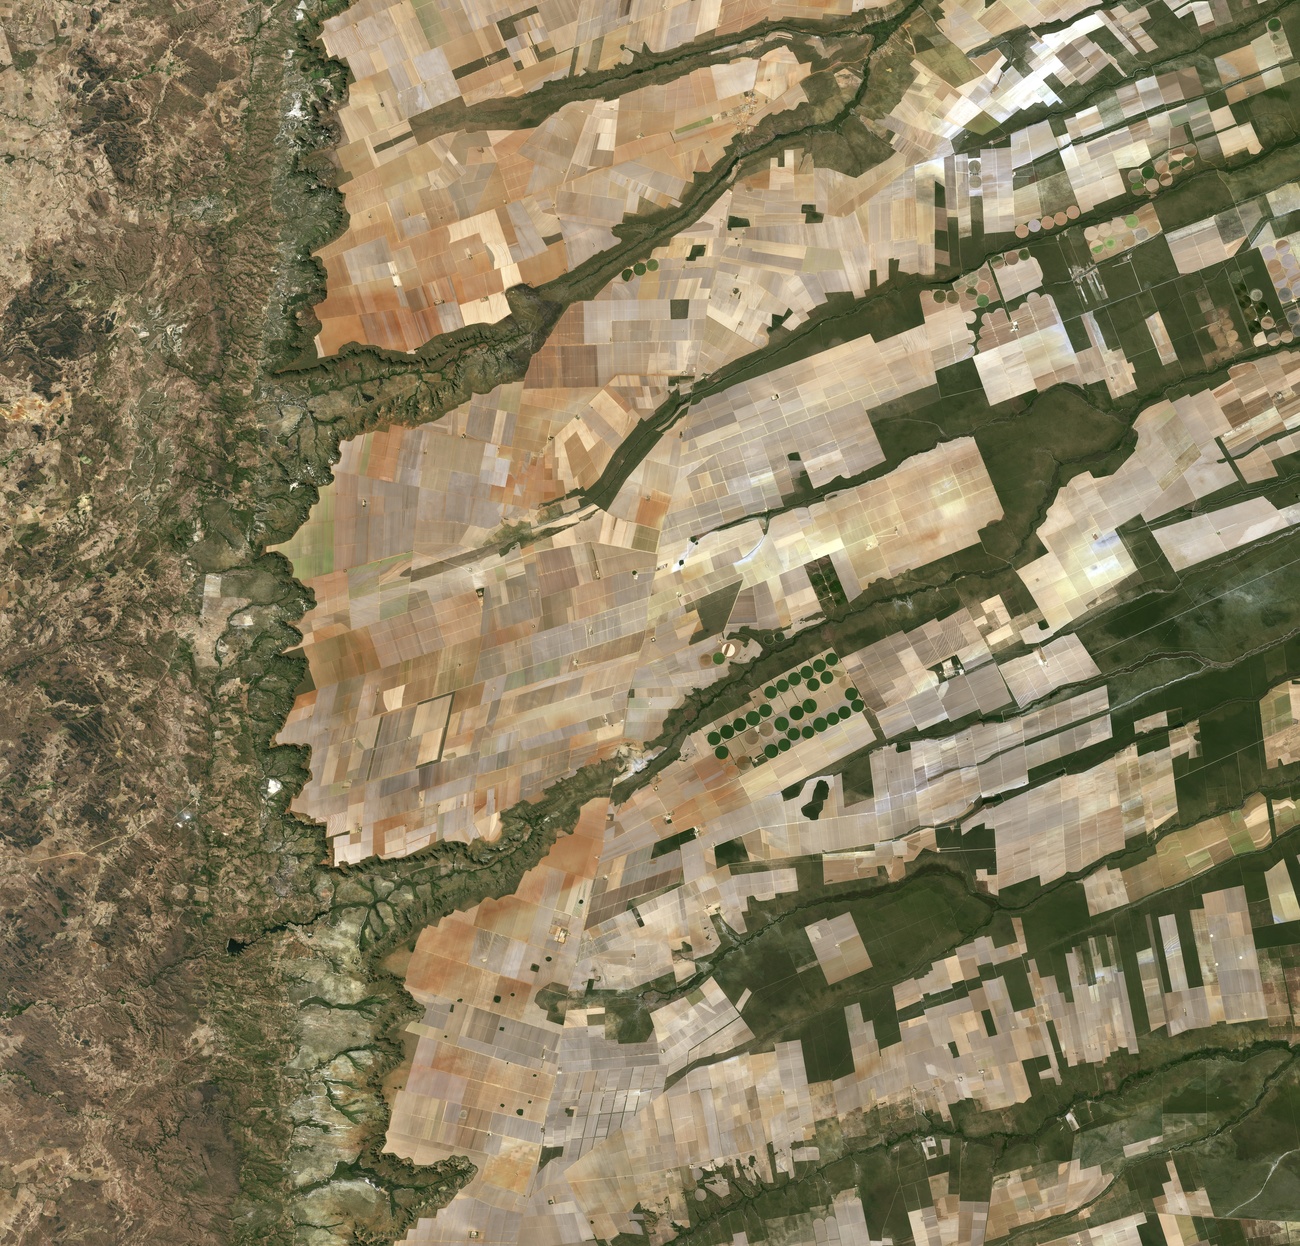 Central-eastern Brazil, where the Bahia, particularly known for soybean production.